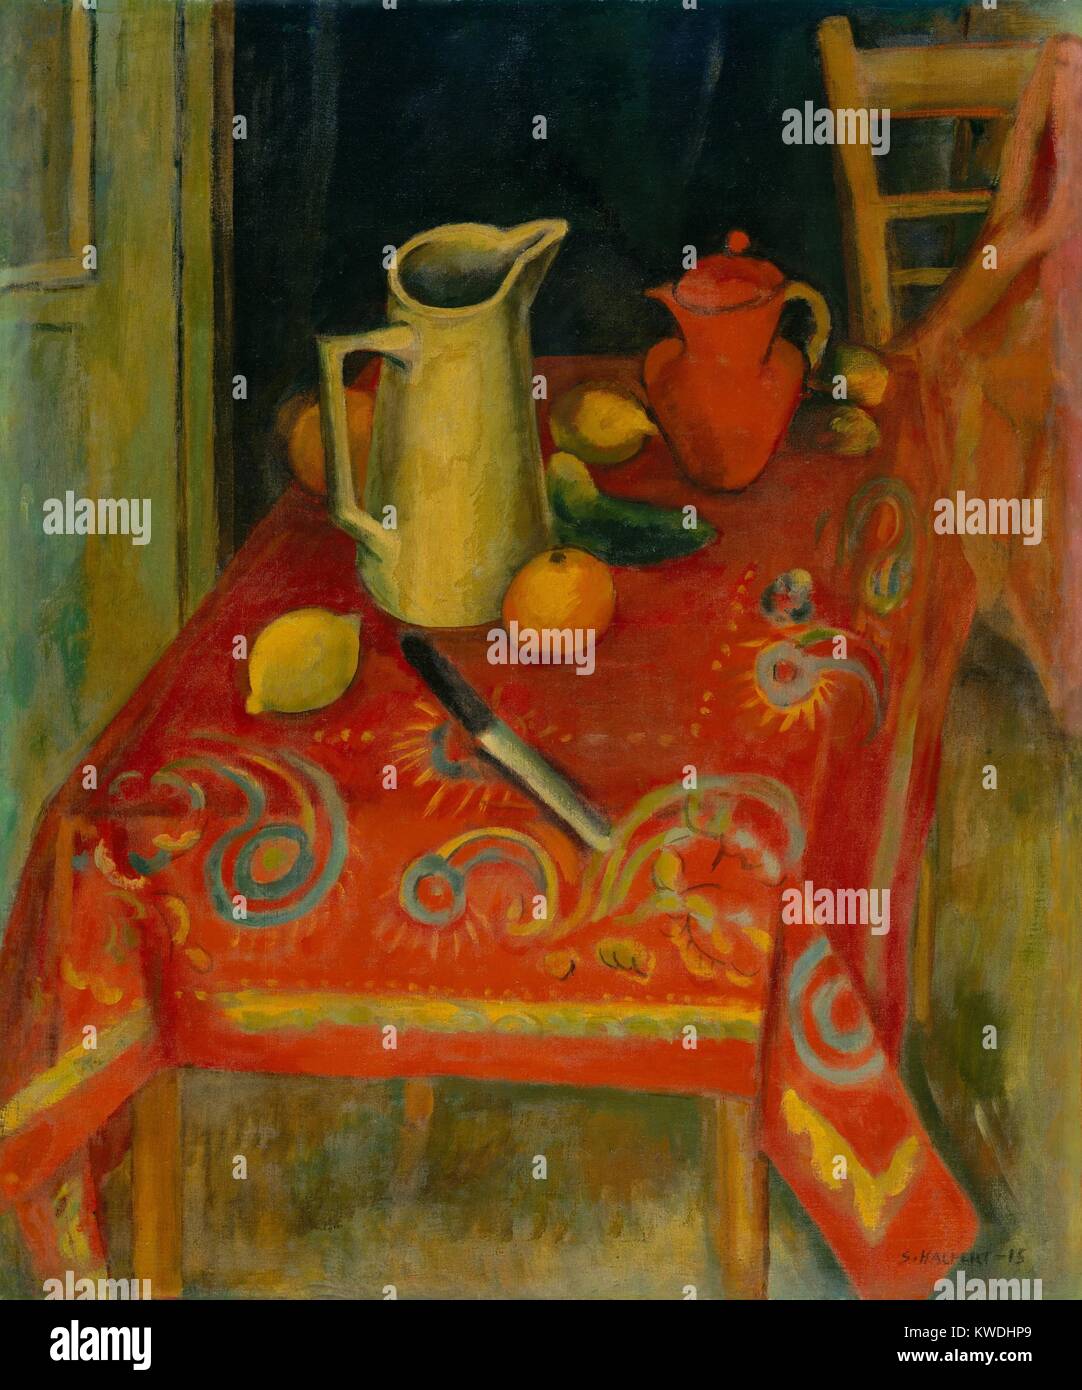 THE RED TABLECLOTH, by Samuel Halpert, 1915, American painting, oil on canvas. The artist studied and lived in Paris and combined the influence of Cezanne and the Fauves in this still life painting (BSLOC 2017 7 115) Stock Photo